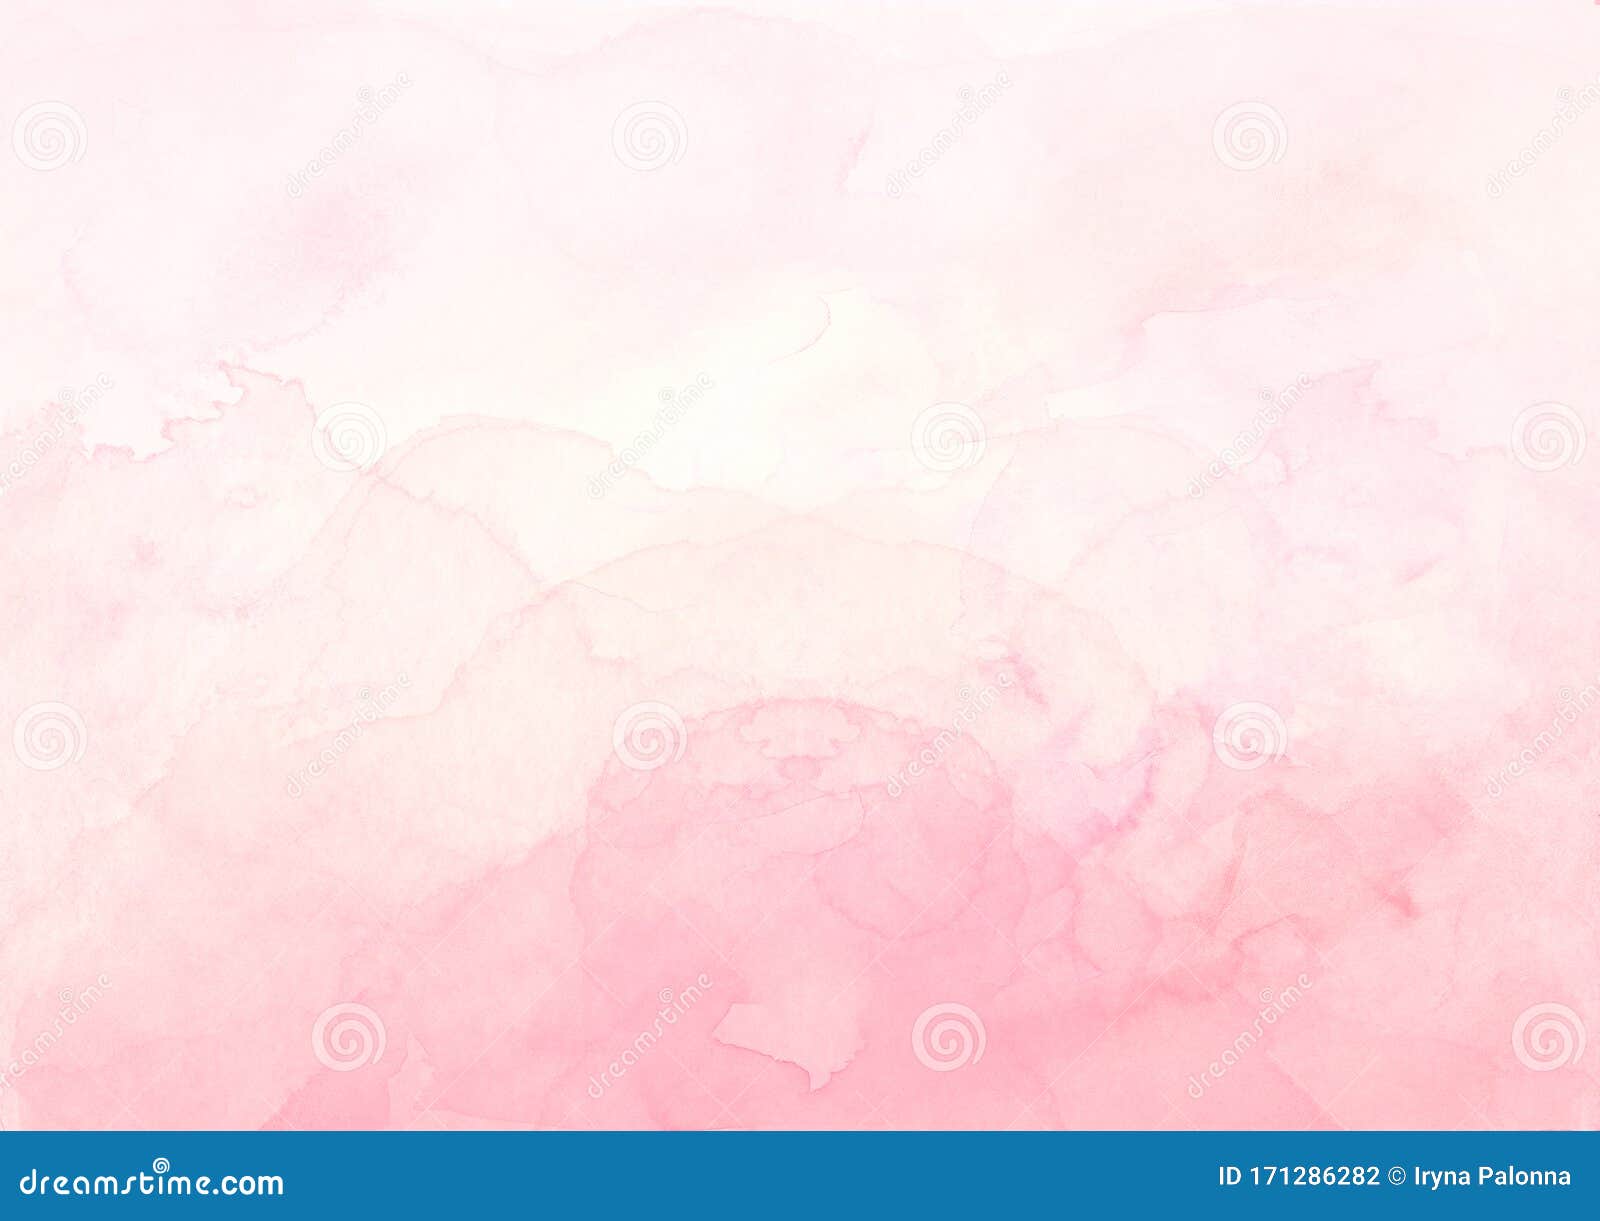 Soft Pink Ombre Background Watercolor Gradient Texture Wedding Invitation  Background Stock Illustration - Illustration of watercolor, gradient:  171286282